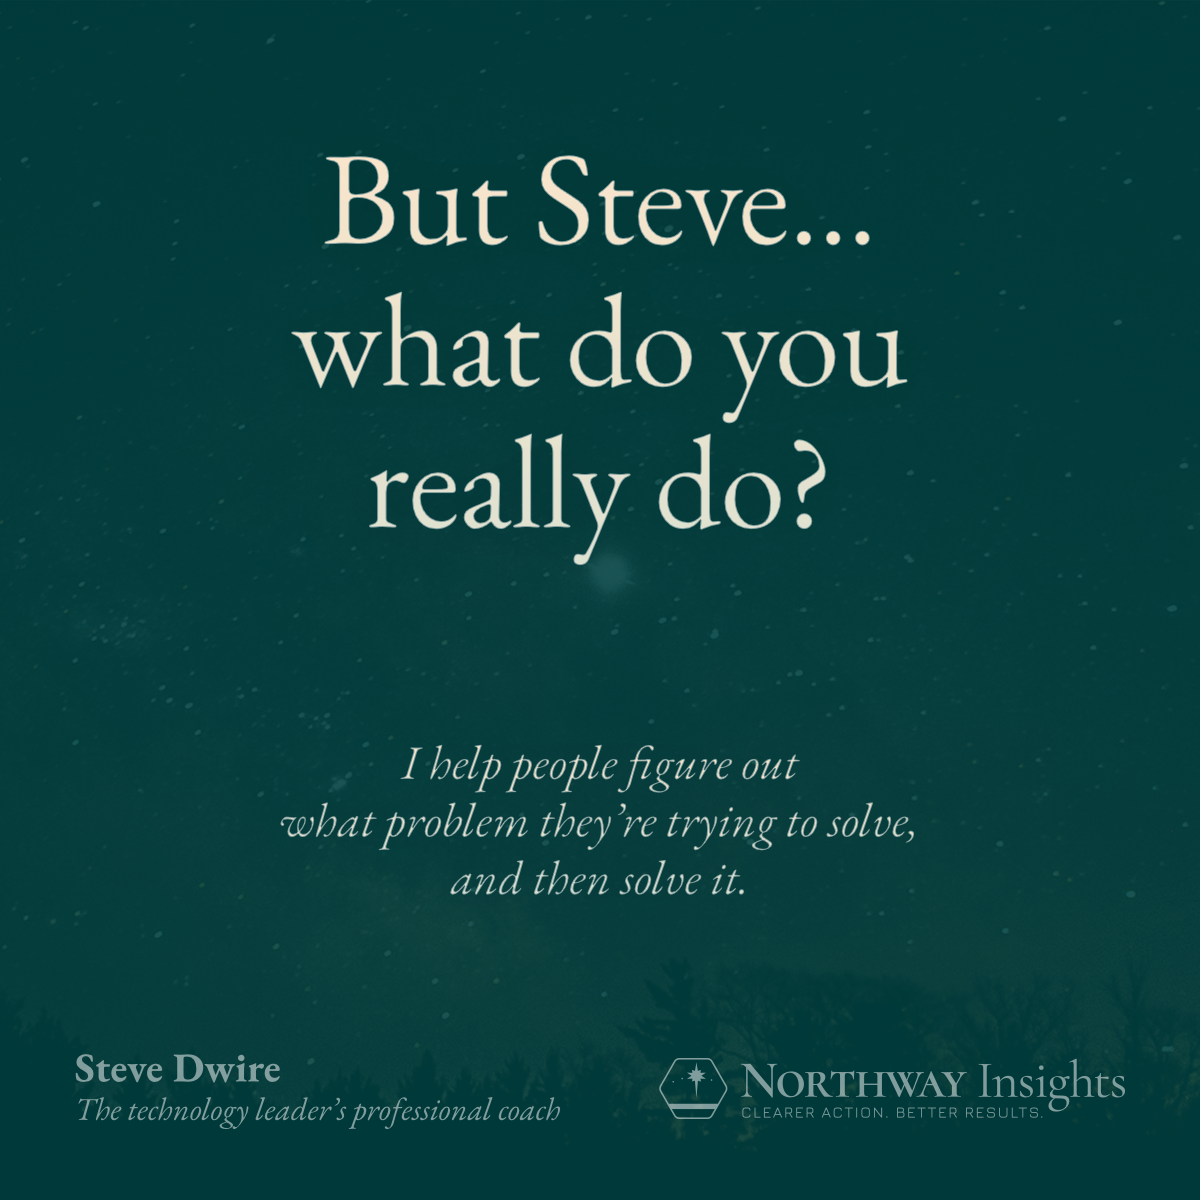 But Steve, what do you really do? (I help people figure out what problem they're trying to solve, and then solve it.)